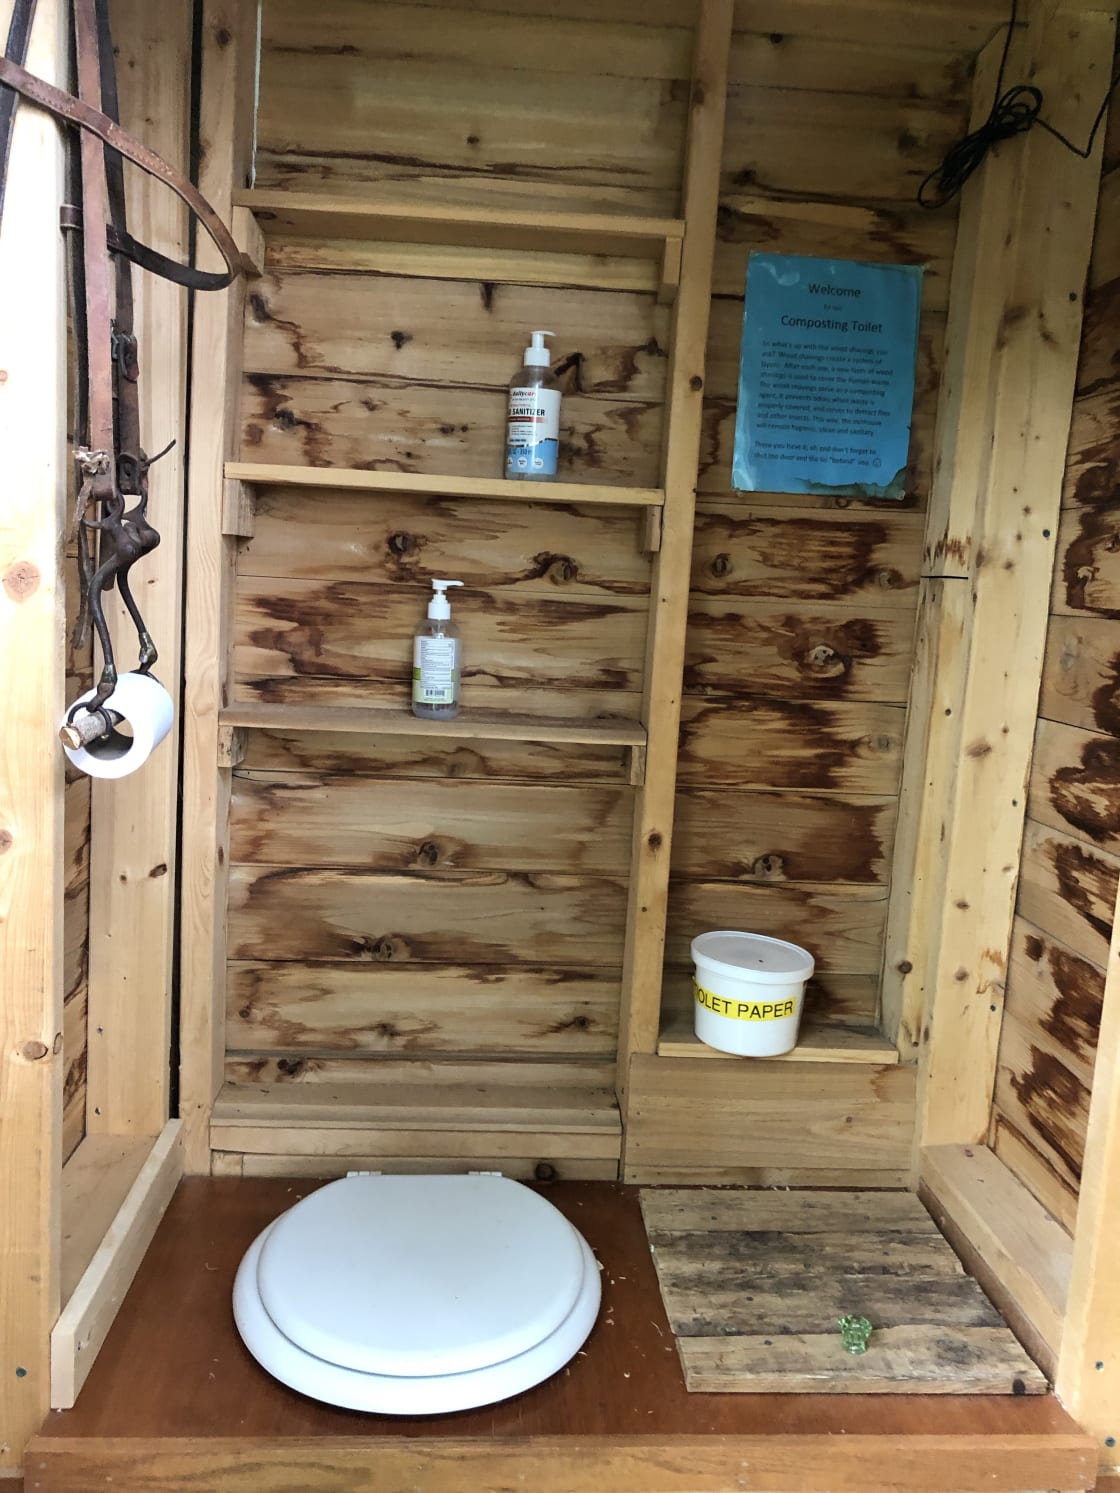 Interior of the outhouse.